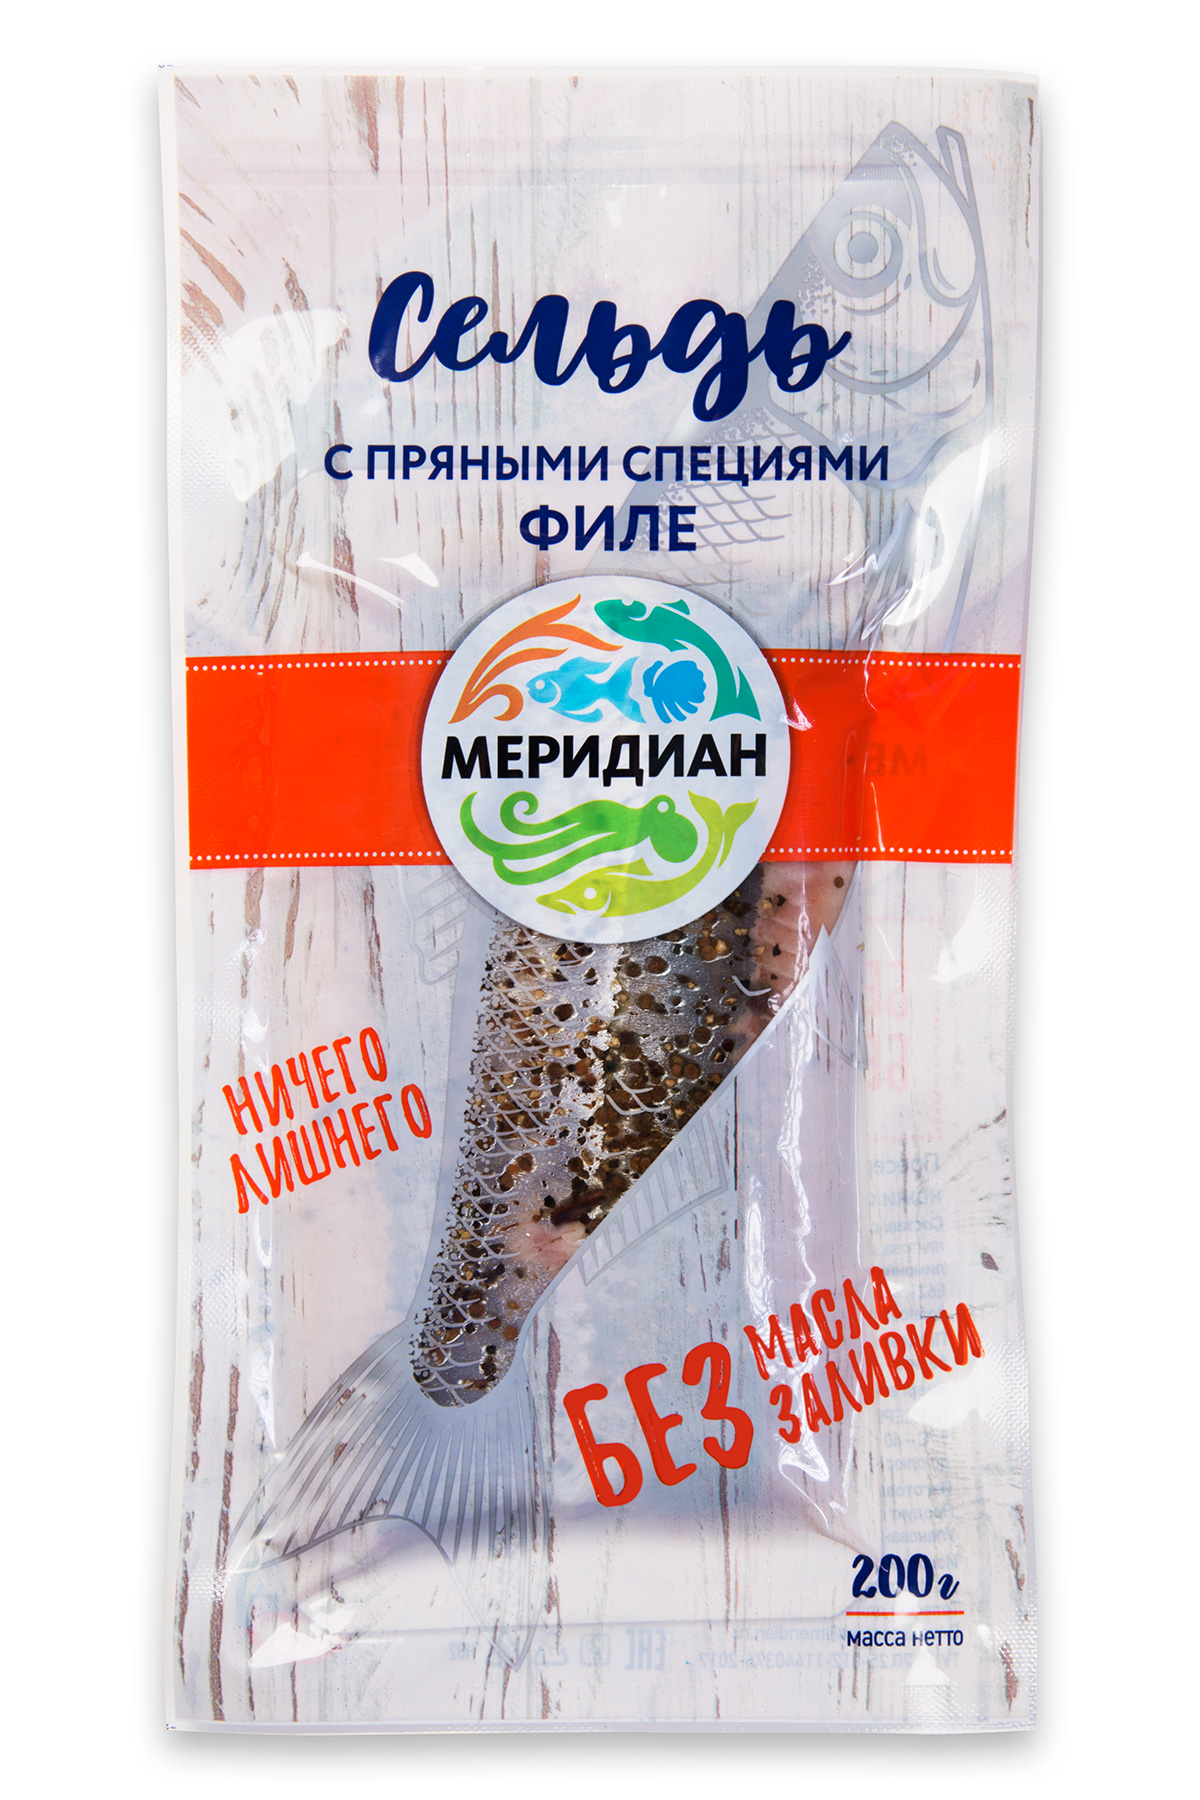 Herring fillet with spicy spices, 200g